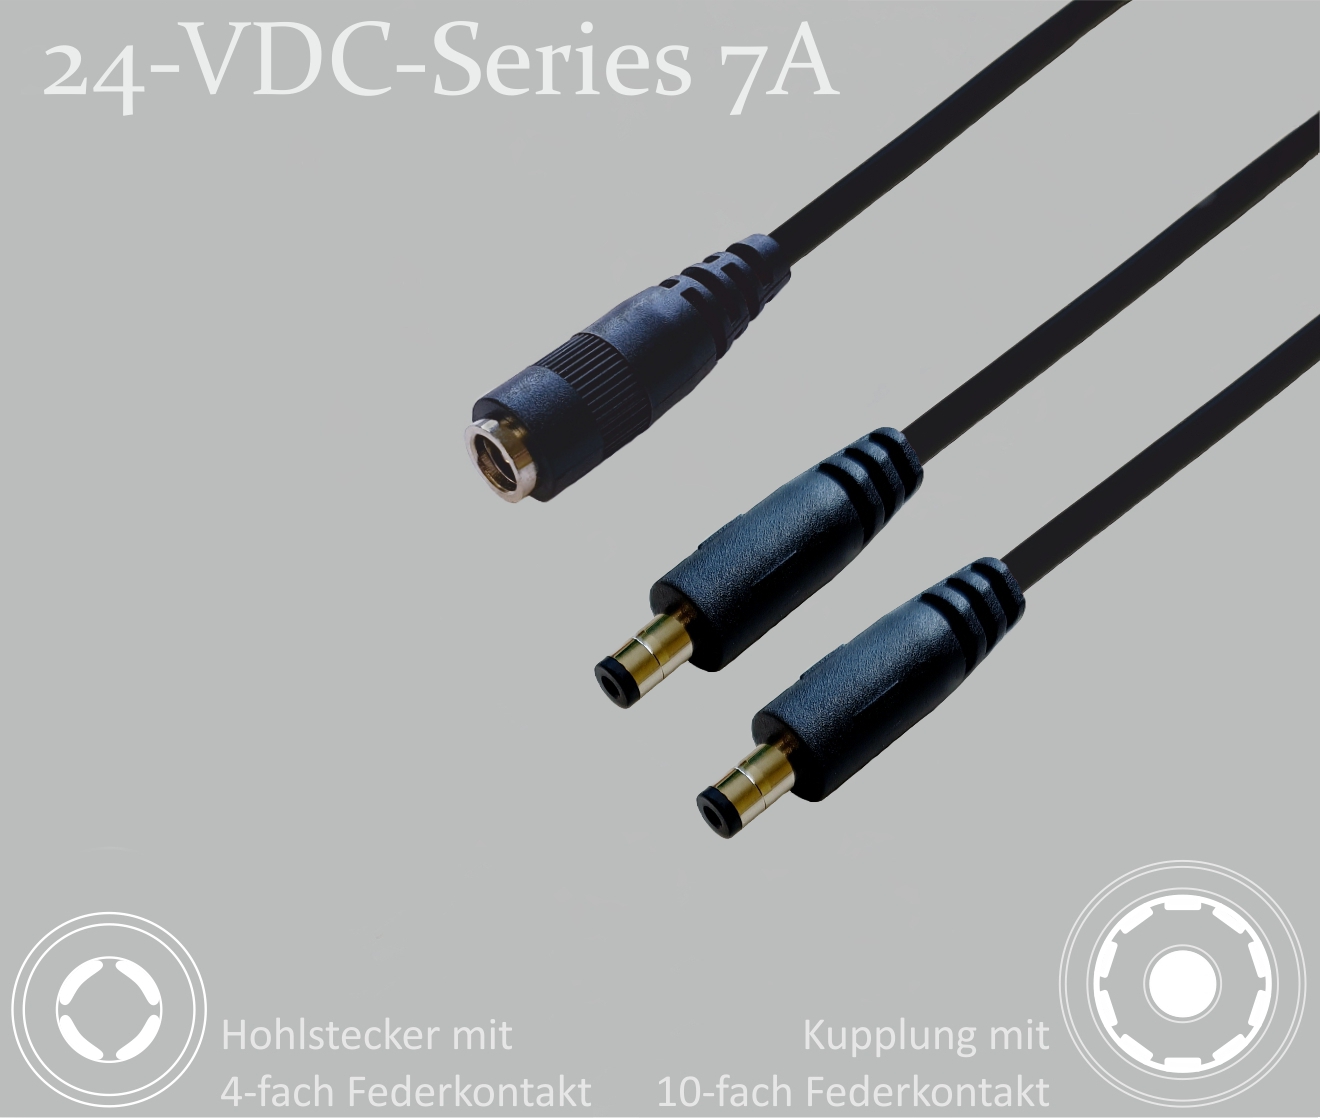 24-VDC-Series 7A, DC distributor 1x DC couplingwith 10-spring contact to 2x DC plug with 4-spring contact, 2.1x5.5mm, round cable 2x0.5mm², black, 0.3m